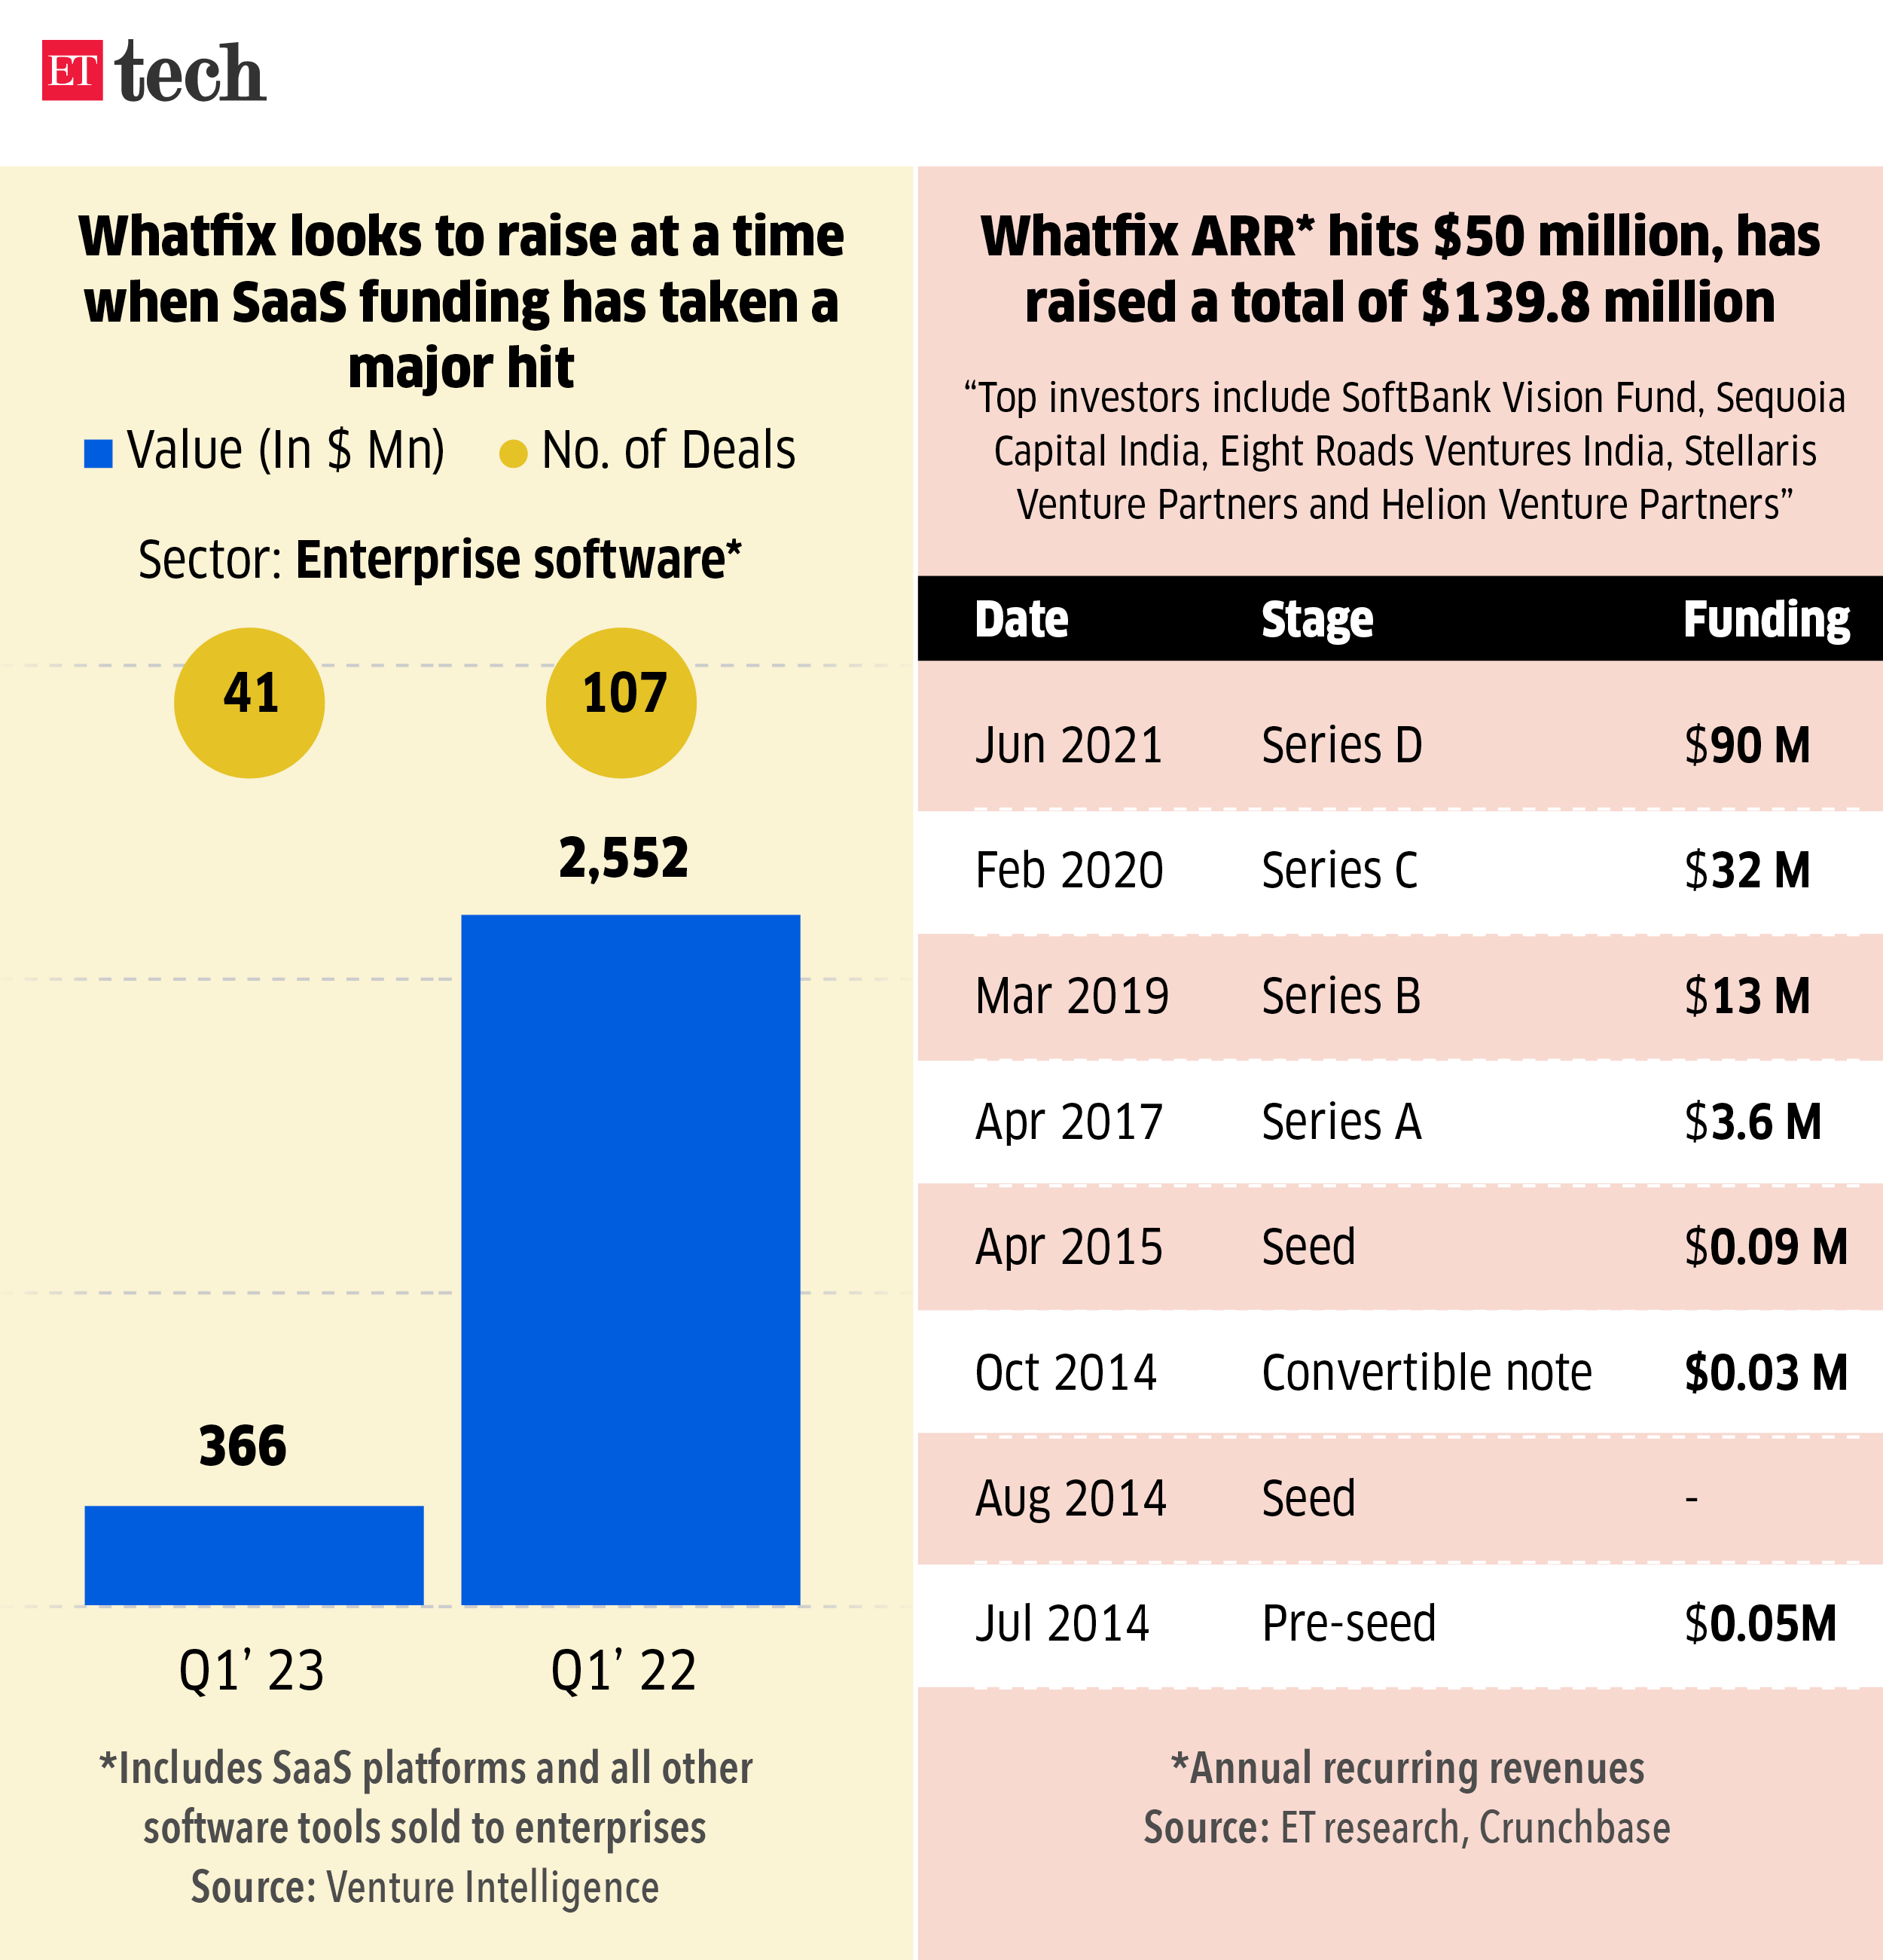 Whatfix looks to raise at a time when SaaS funding has taken a major hit_Graphic_ETTECH